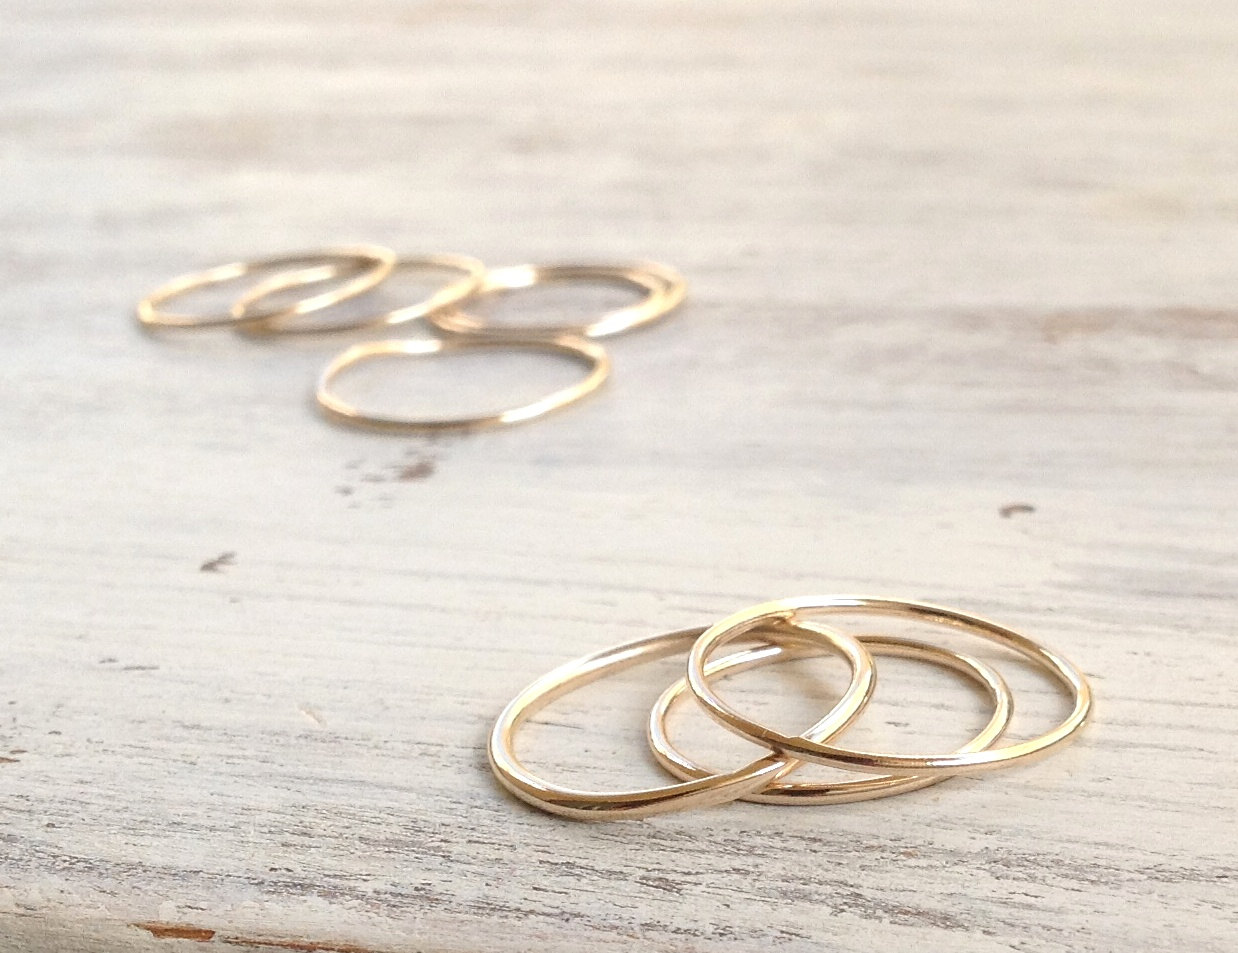 sef of 2 rings, knuckle ring, stacking rings, thin ring, gold knuckle ring, simple ring, smooth ring RB10